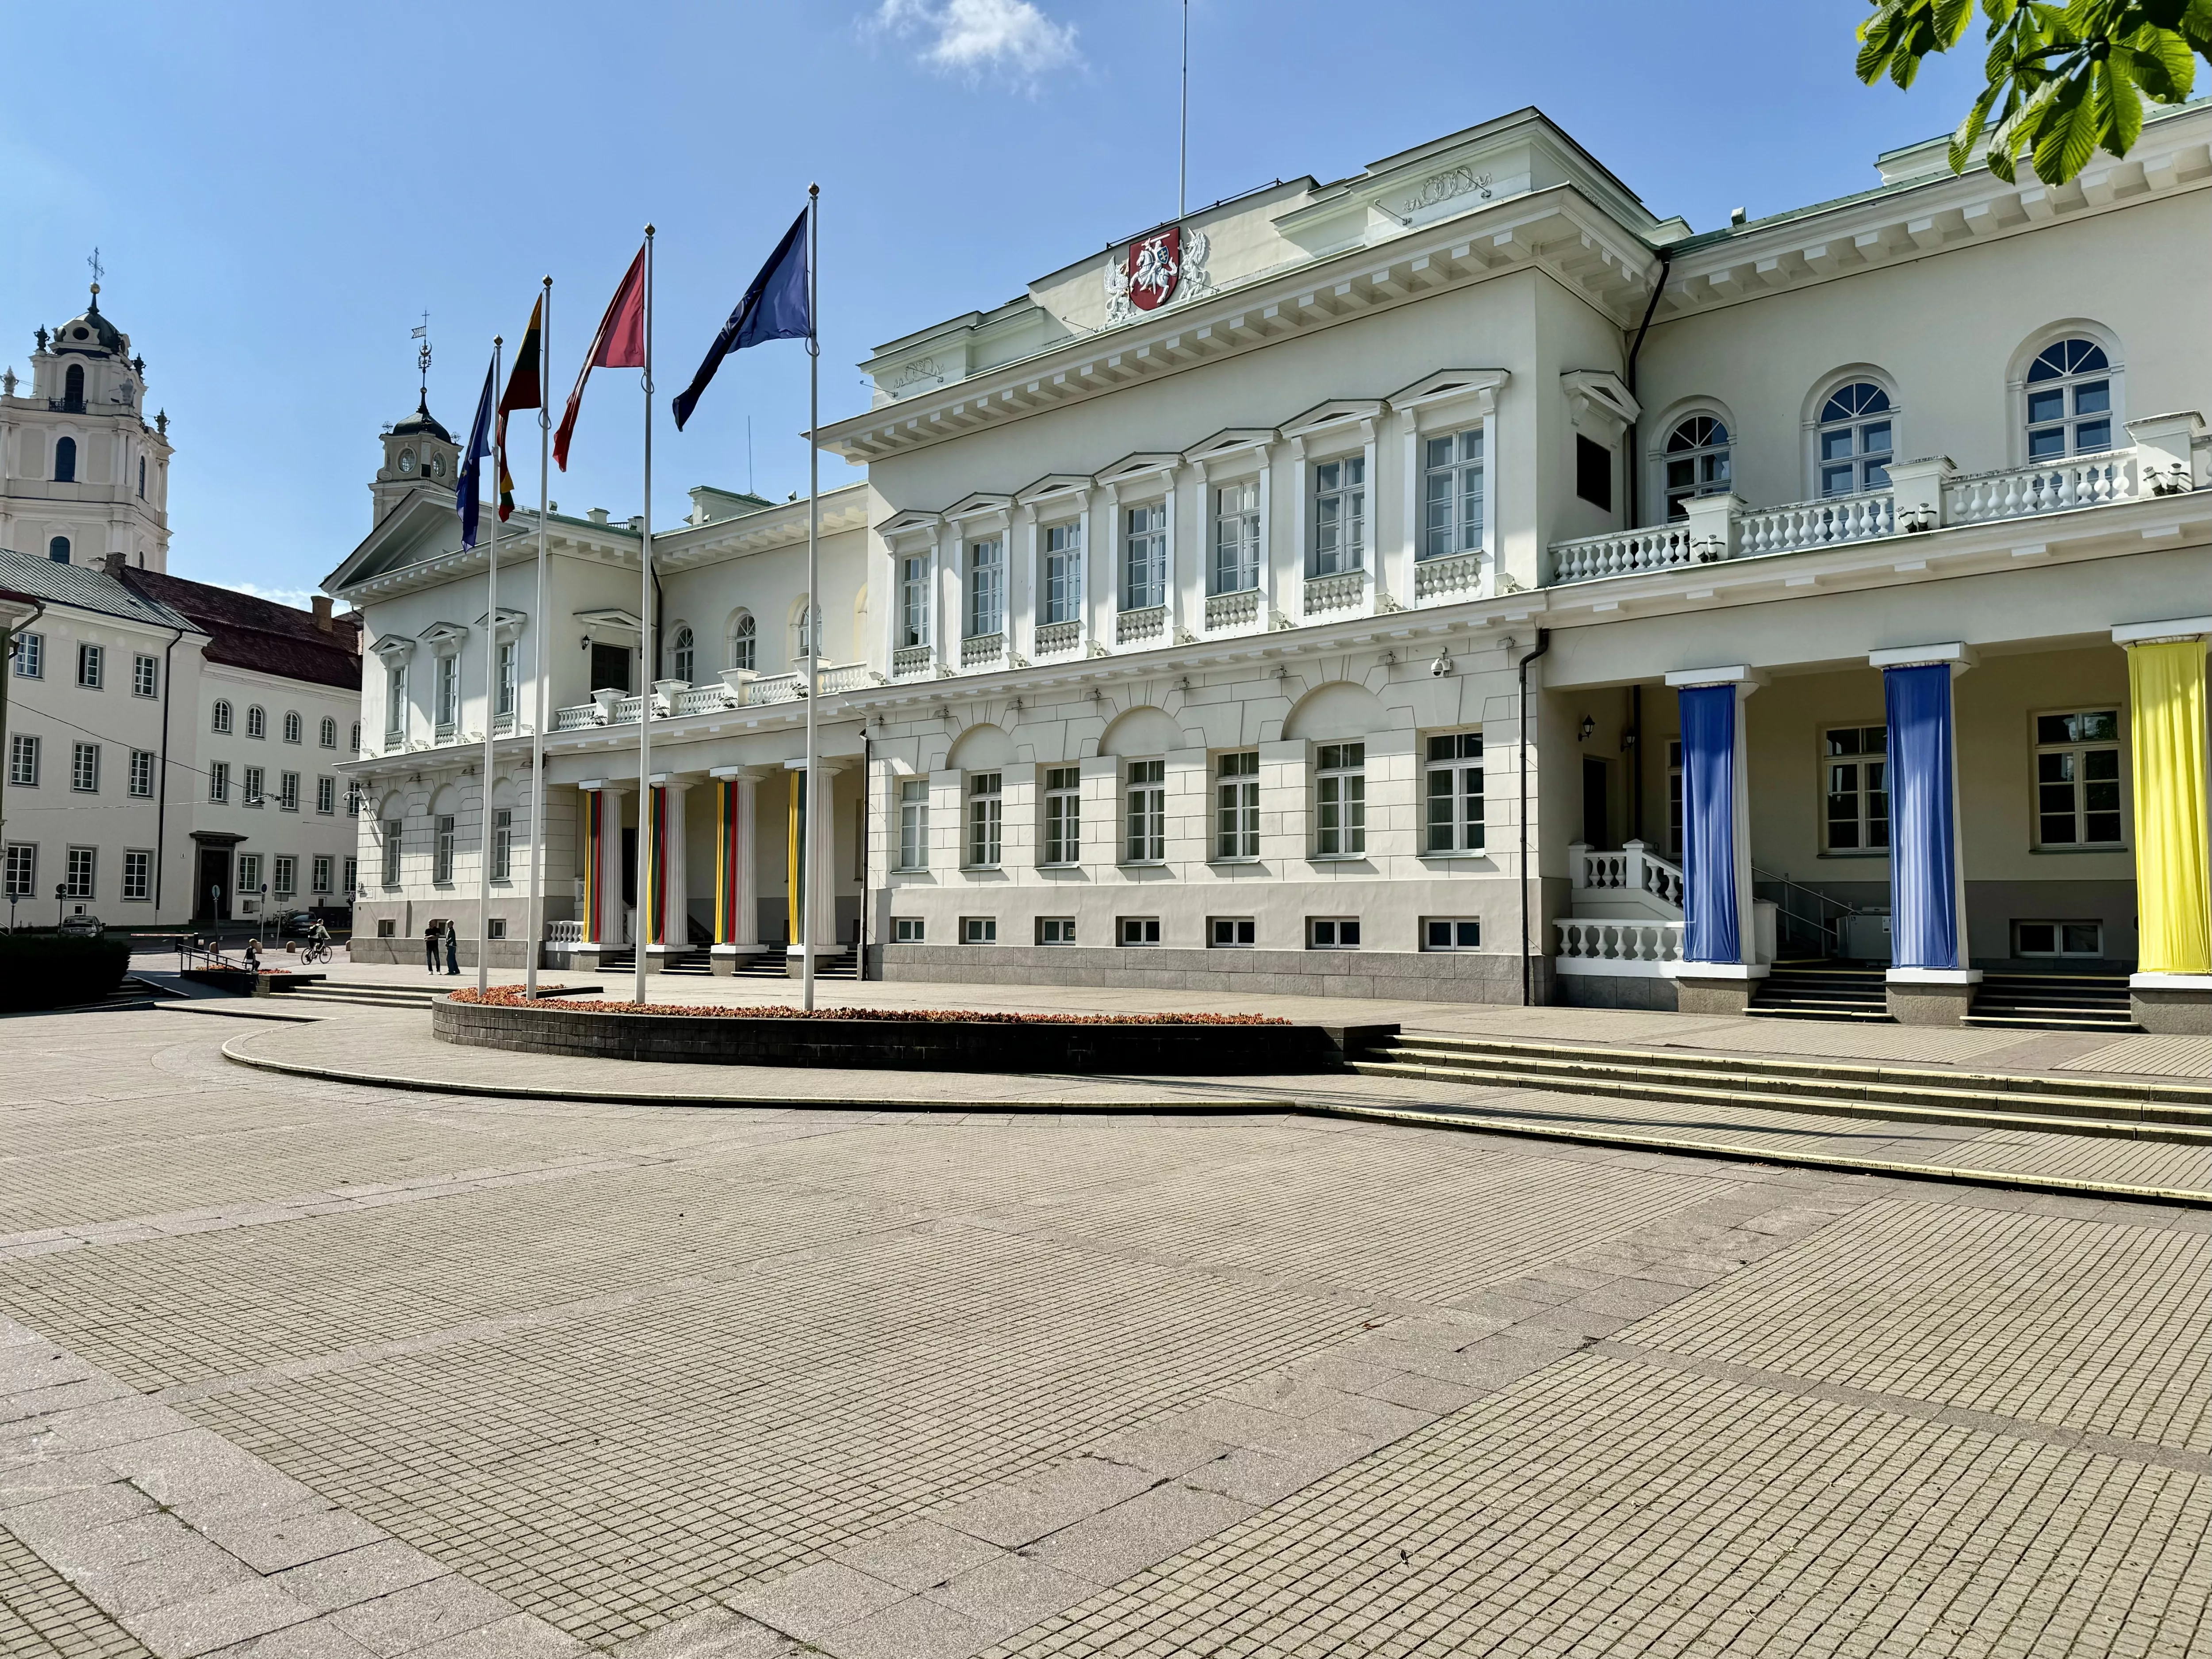 Old town Vilnius, Lithuania Presidential palace